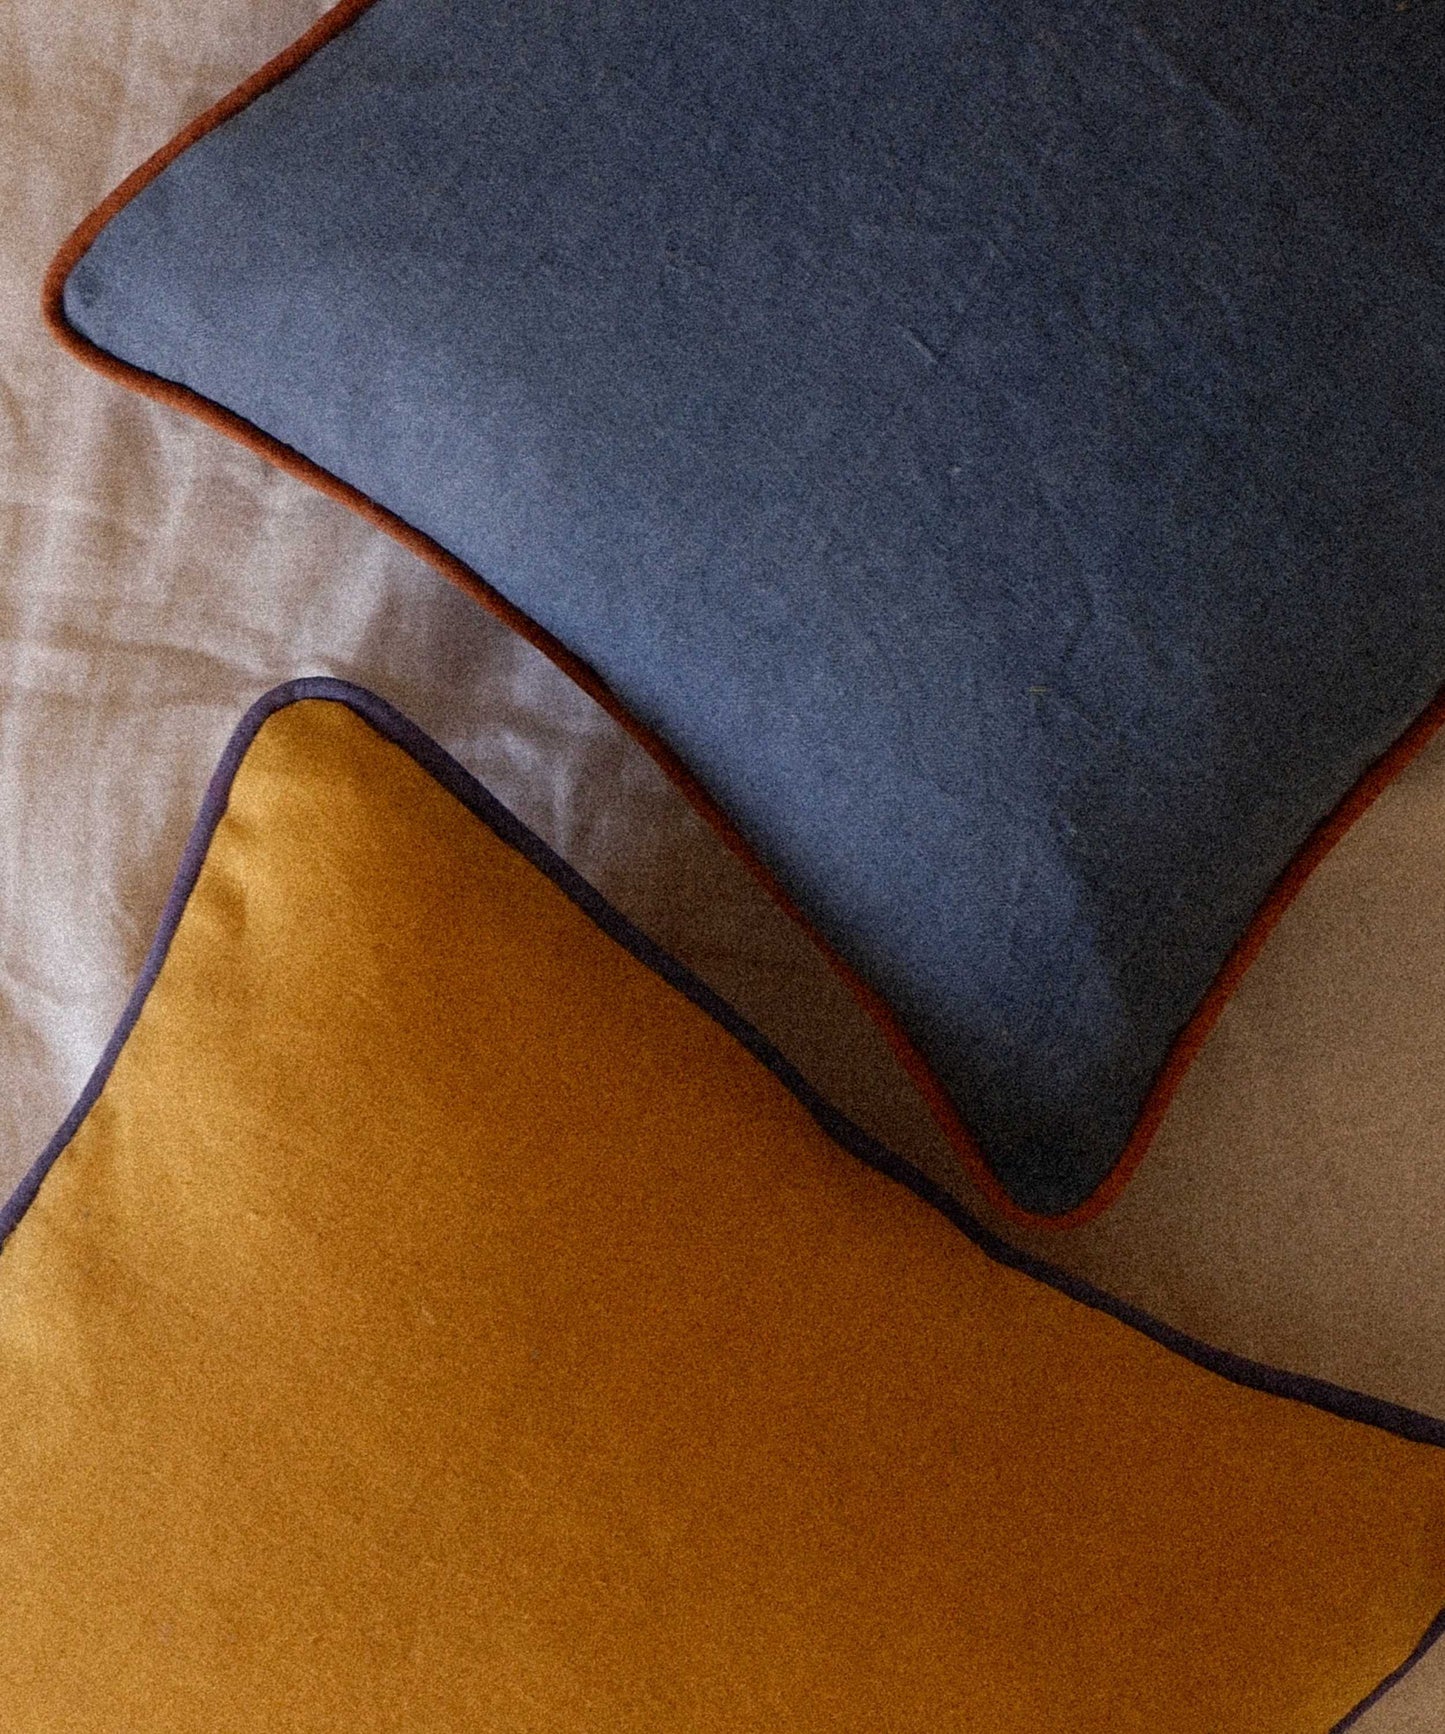 Contrast Cushion in Blue and Terracotta